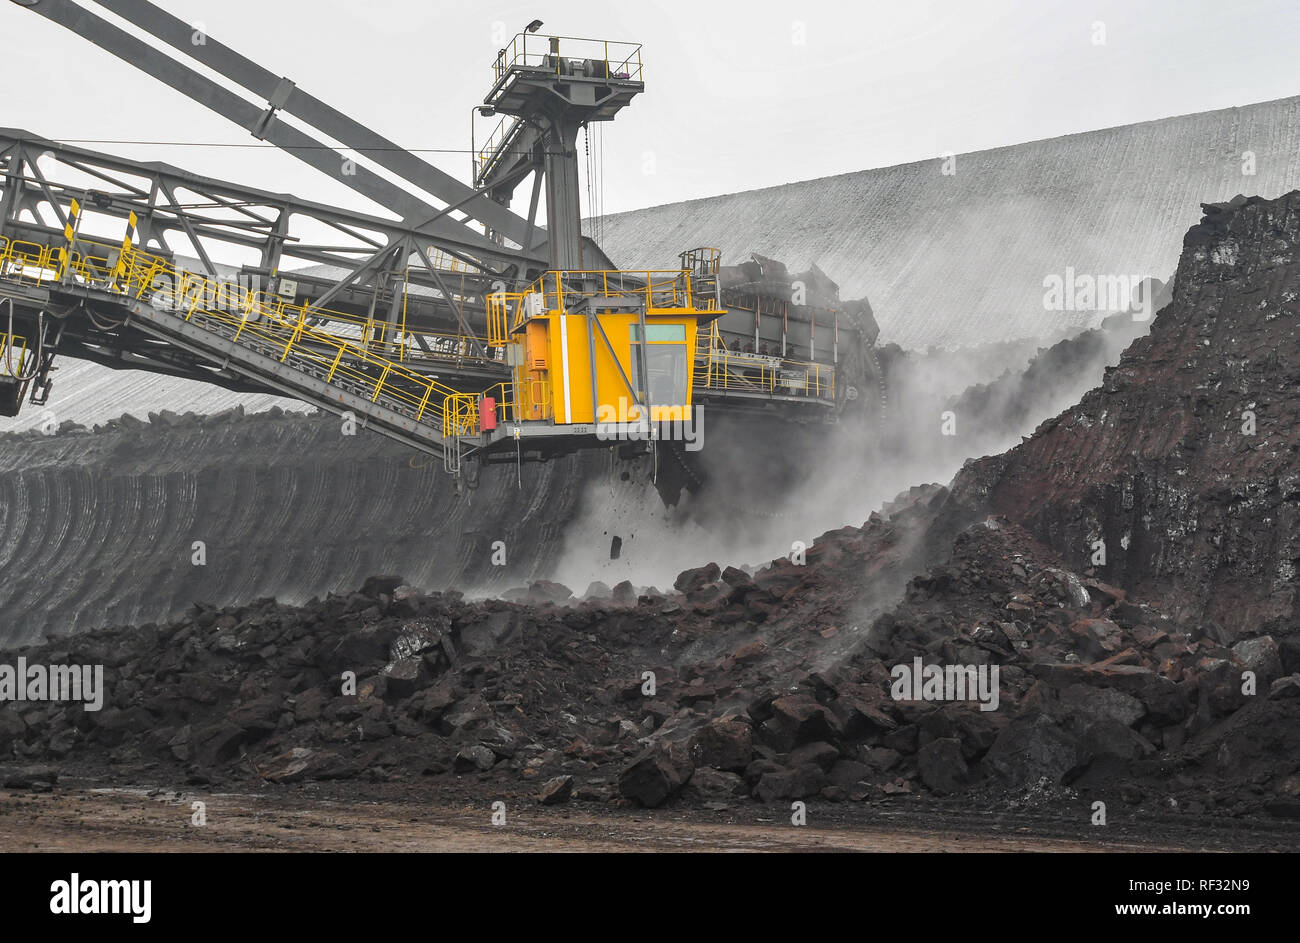 Welzow, Germany. 23rd Jan, 2019. A bucket wheel excavator removes lignite from the Welzow-Süd opencast lignite mine operated by Lausitz Energie Bergbau AG (LEAG). Here the 2nd Lusatian seam is mined. It lies at a depth of 90 to 130 metres and is 10 to 16 metres thick. About 20 million tonnes of raw lignite are mined annually from the Welzow-Süd opencast mine and burned to generate electricity at the three large power plants in Jänschwalde and Schwarze Pumpe as well as in Boxberg in Saxony. Credit: Patrick Pleul/dpa-Zentralbild/ZB/dpa/Alamy Live News Stock Photo